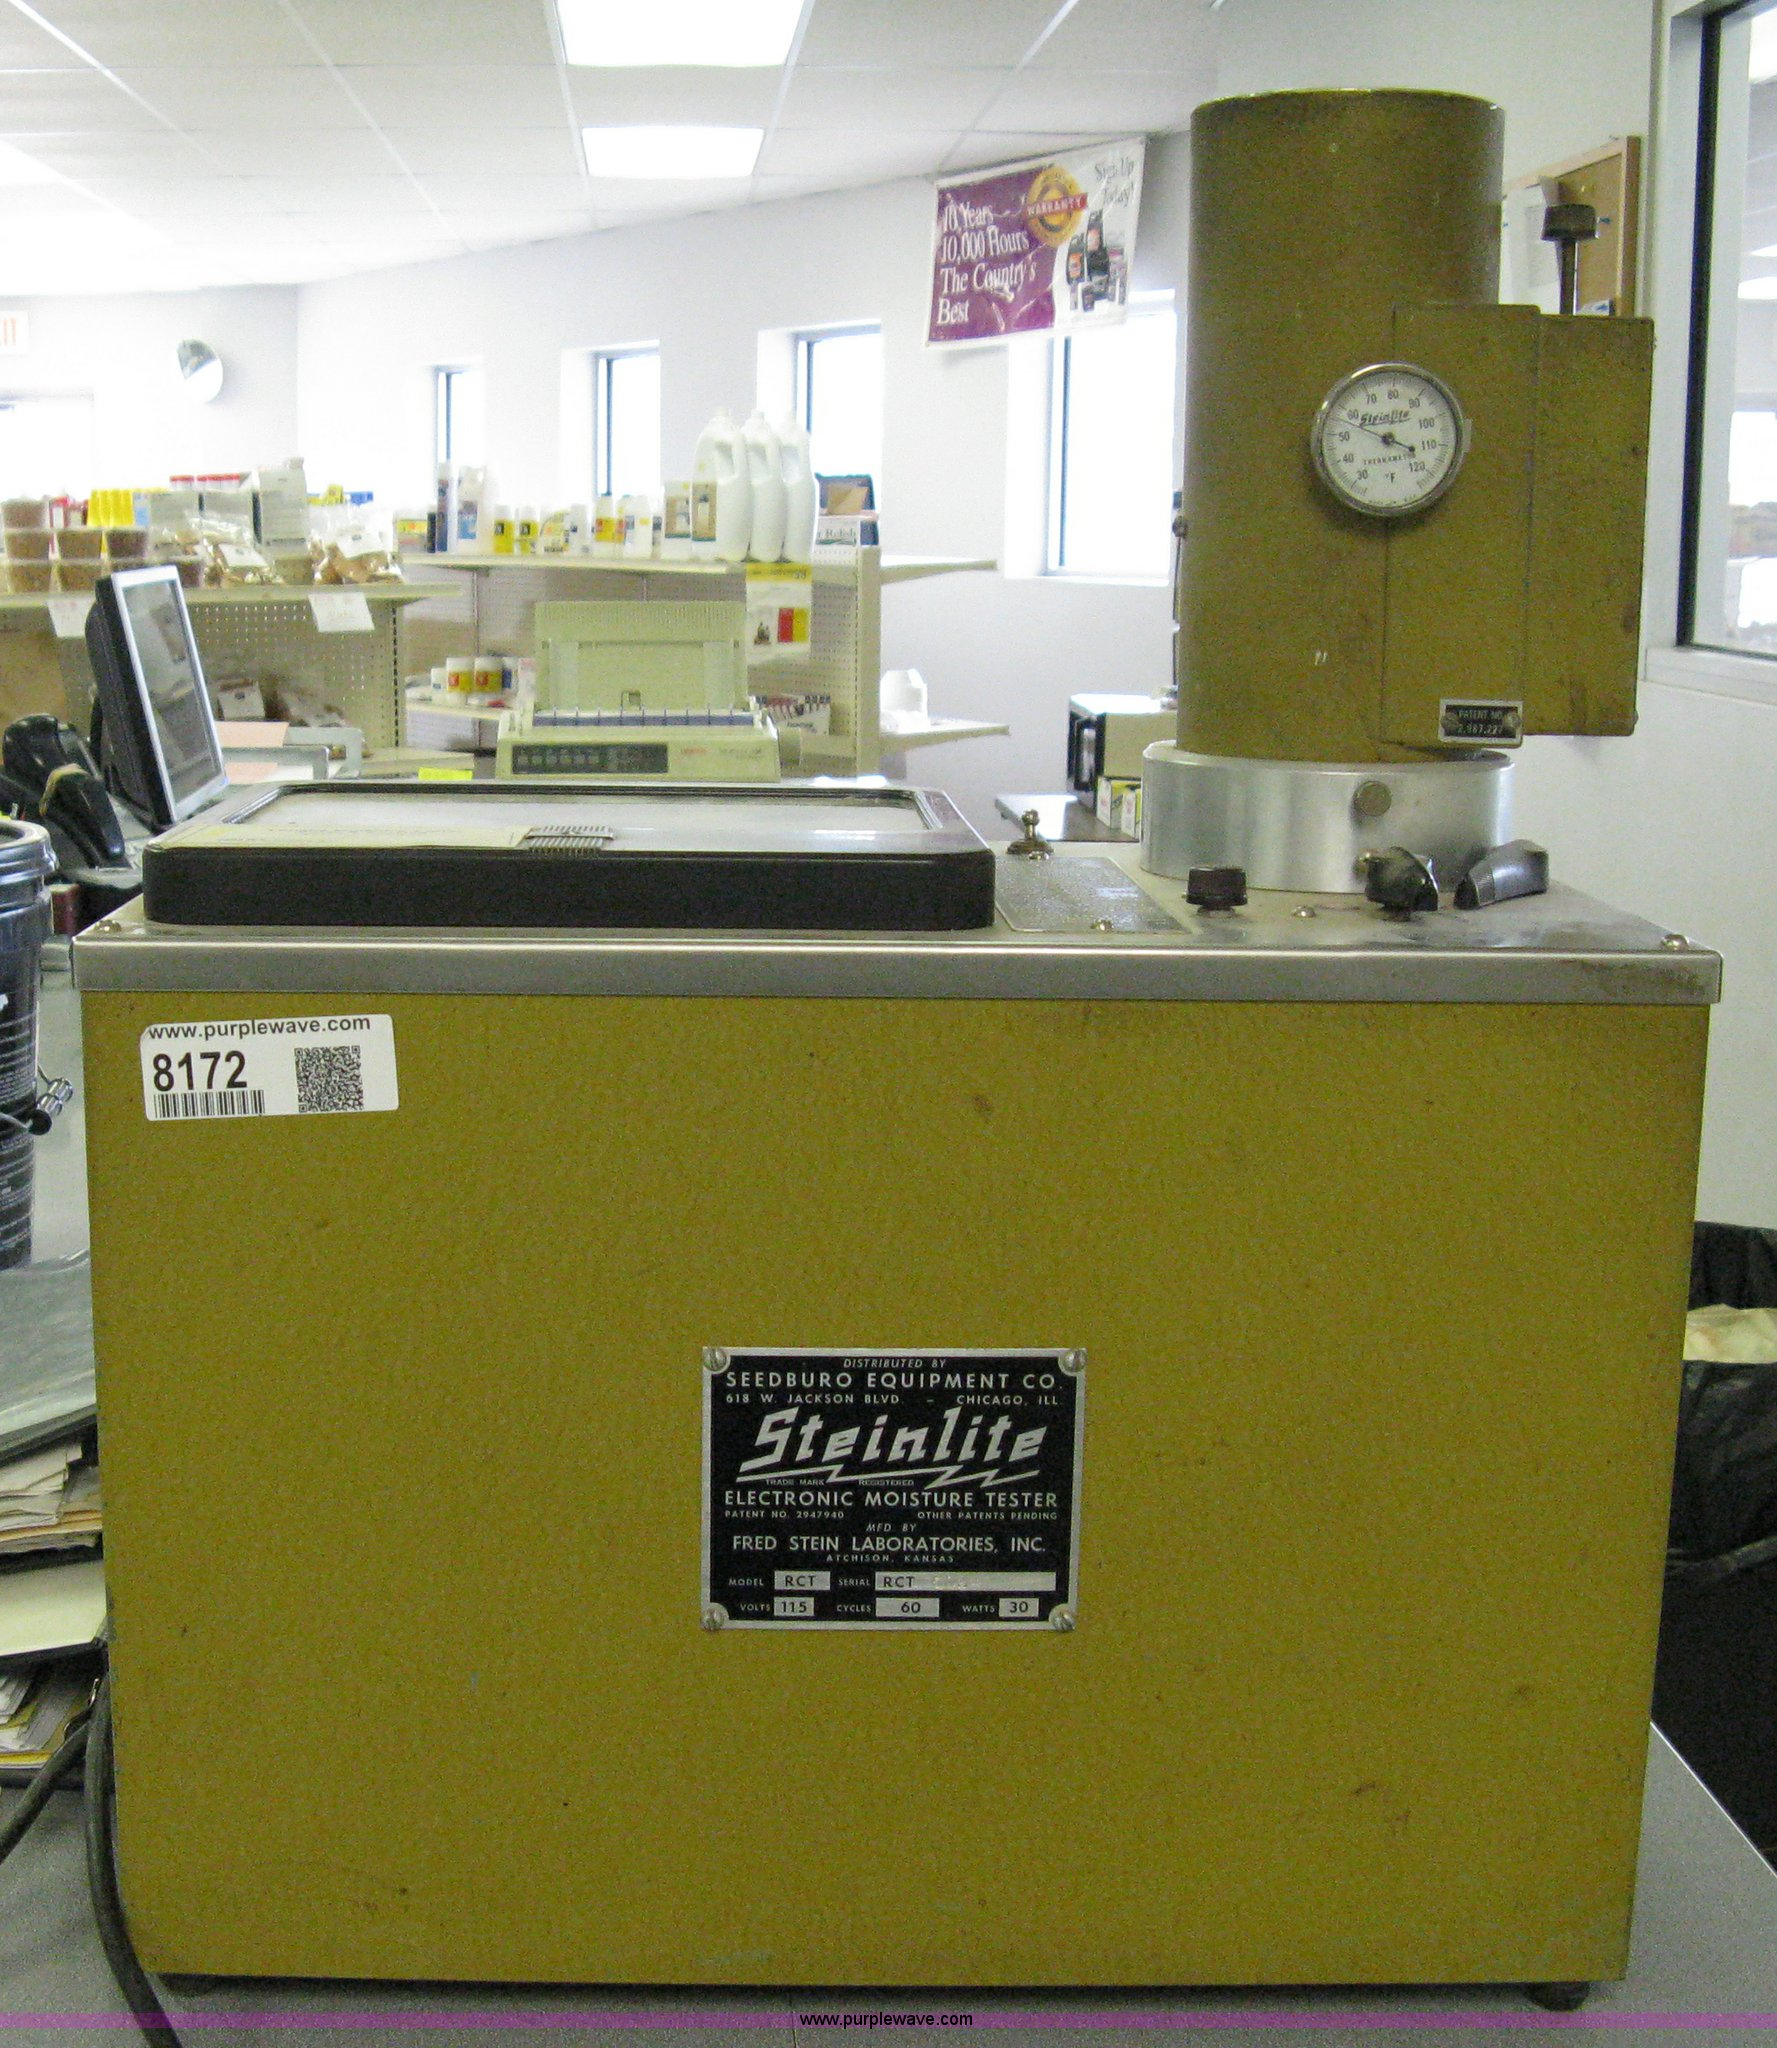 A Steinlite Moisture Tester with customer support and partnerships